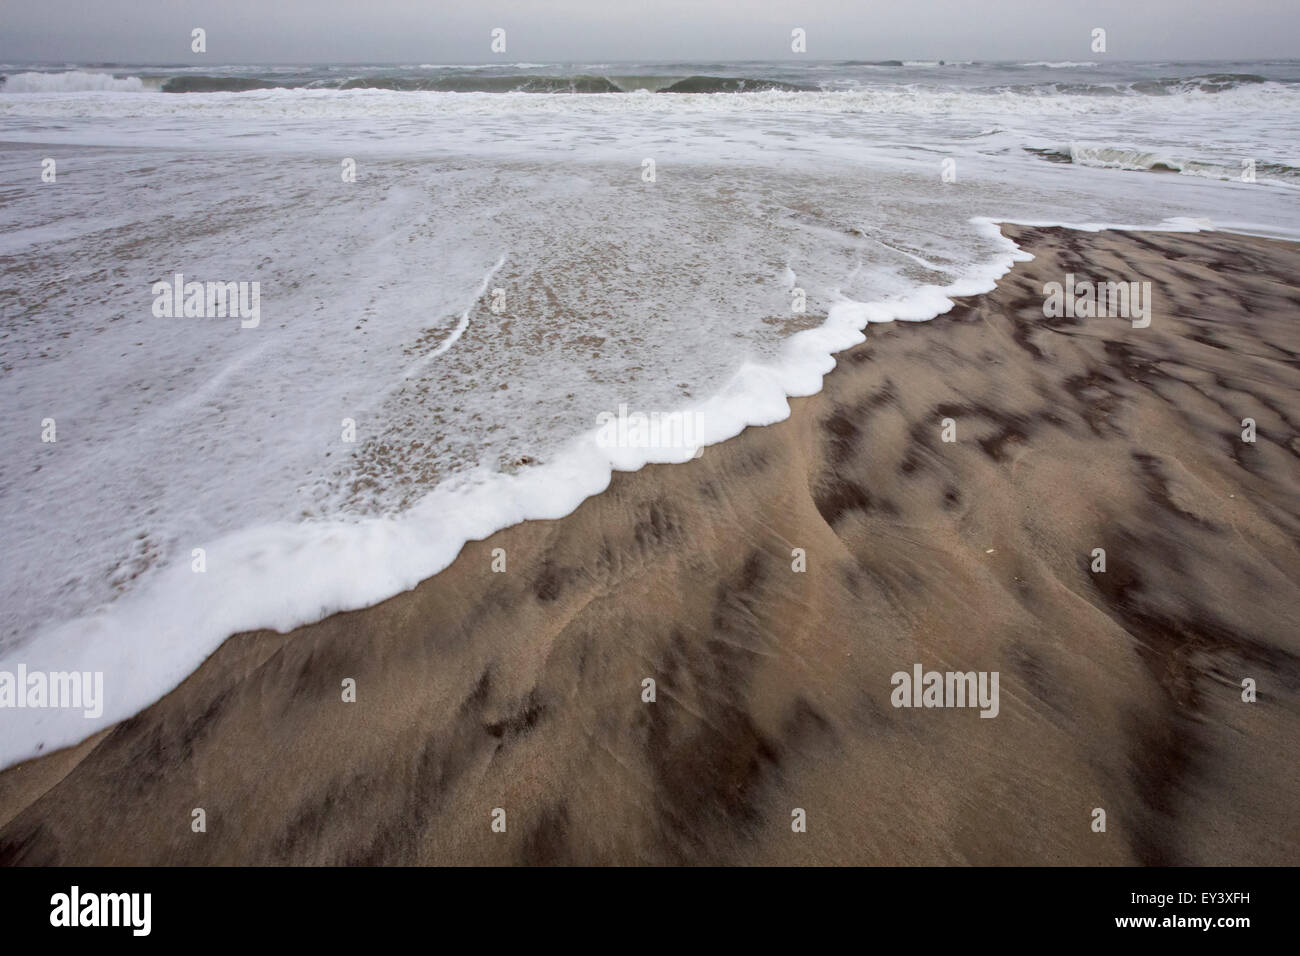 Waves lapping on the shore on a sandy beach. Stock Photo